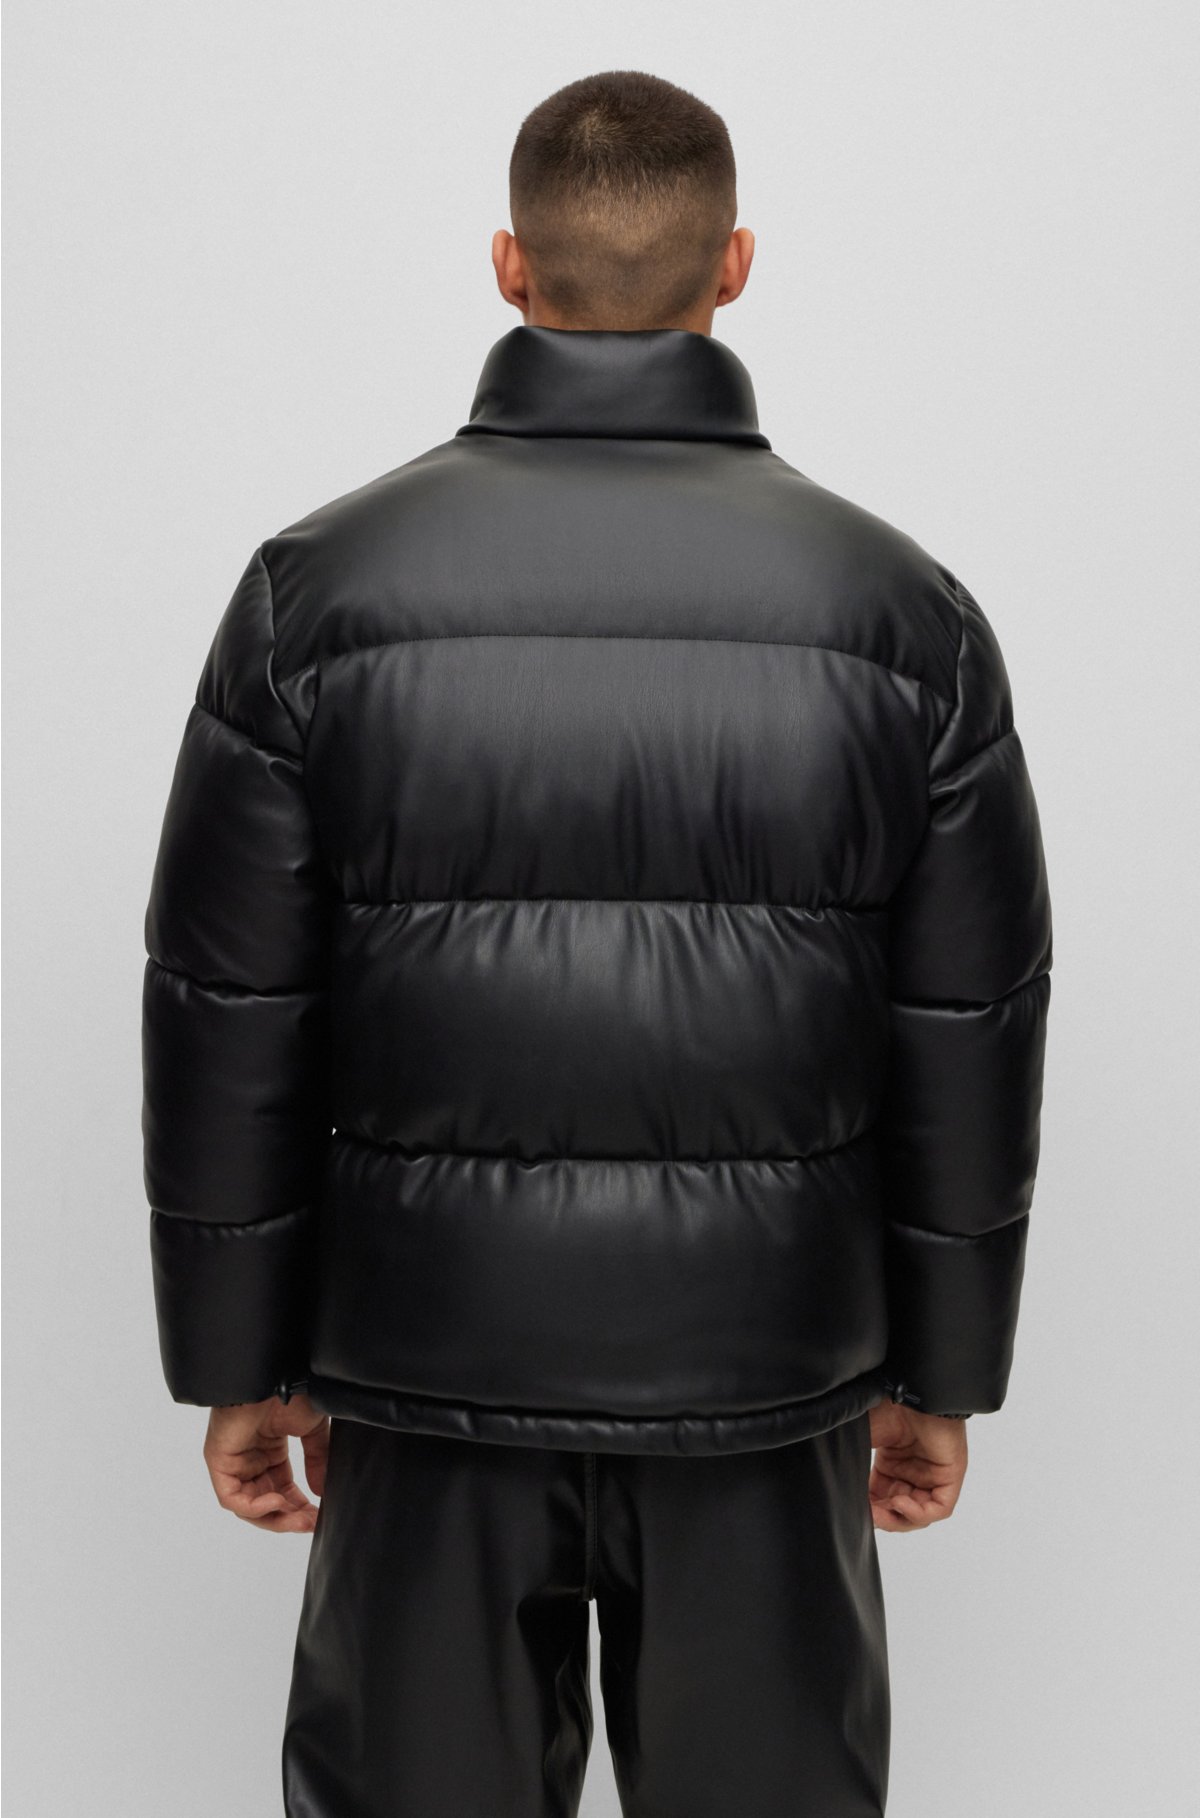 HUGO - Regular-fit padded jacket in faux leather